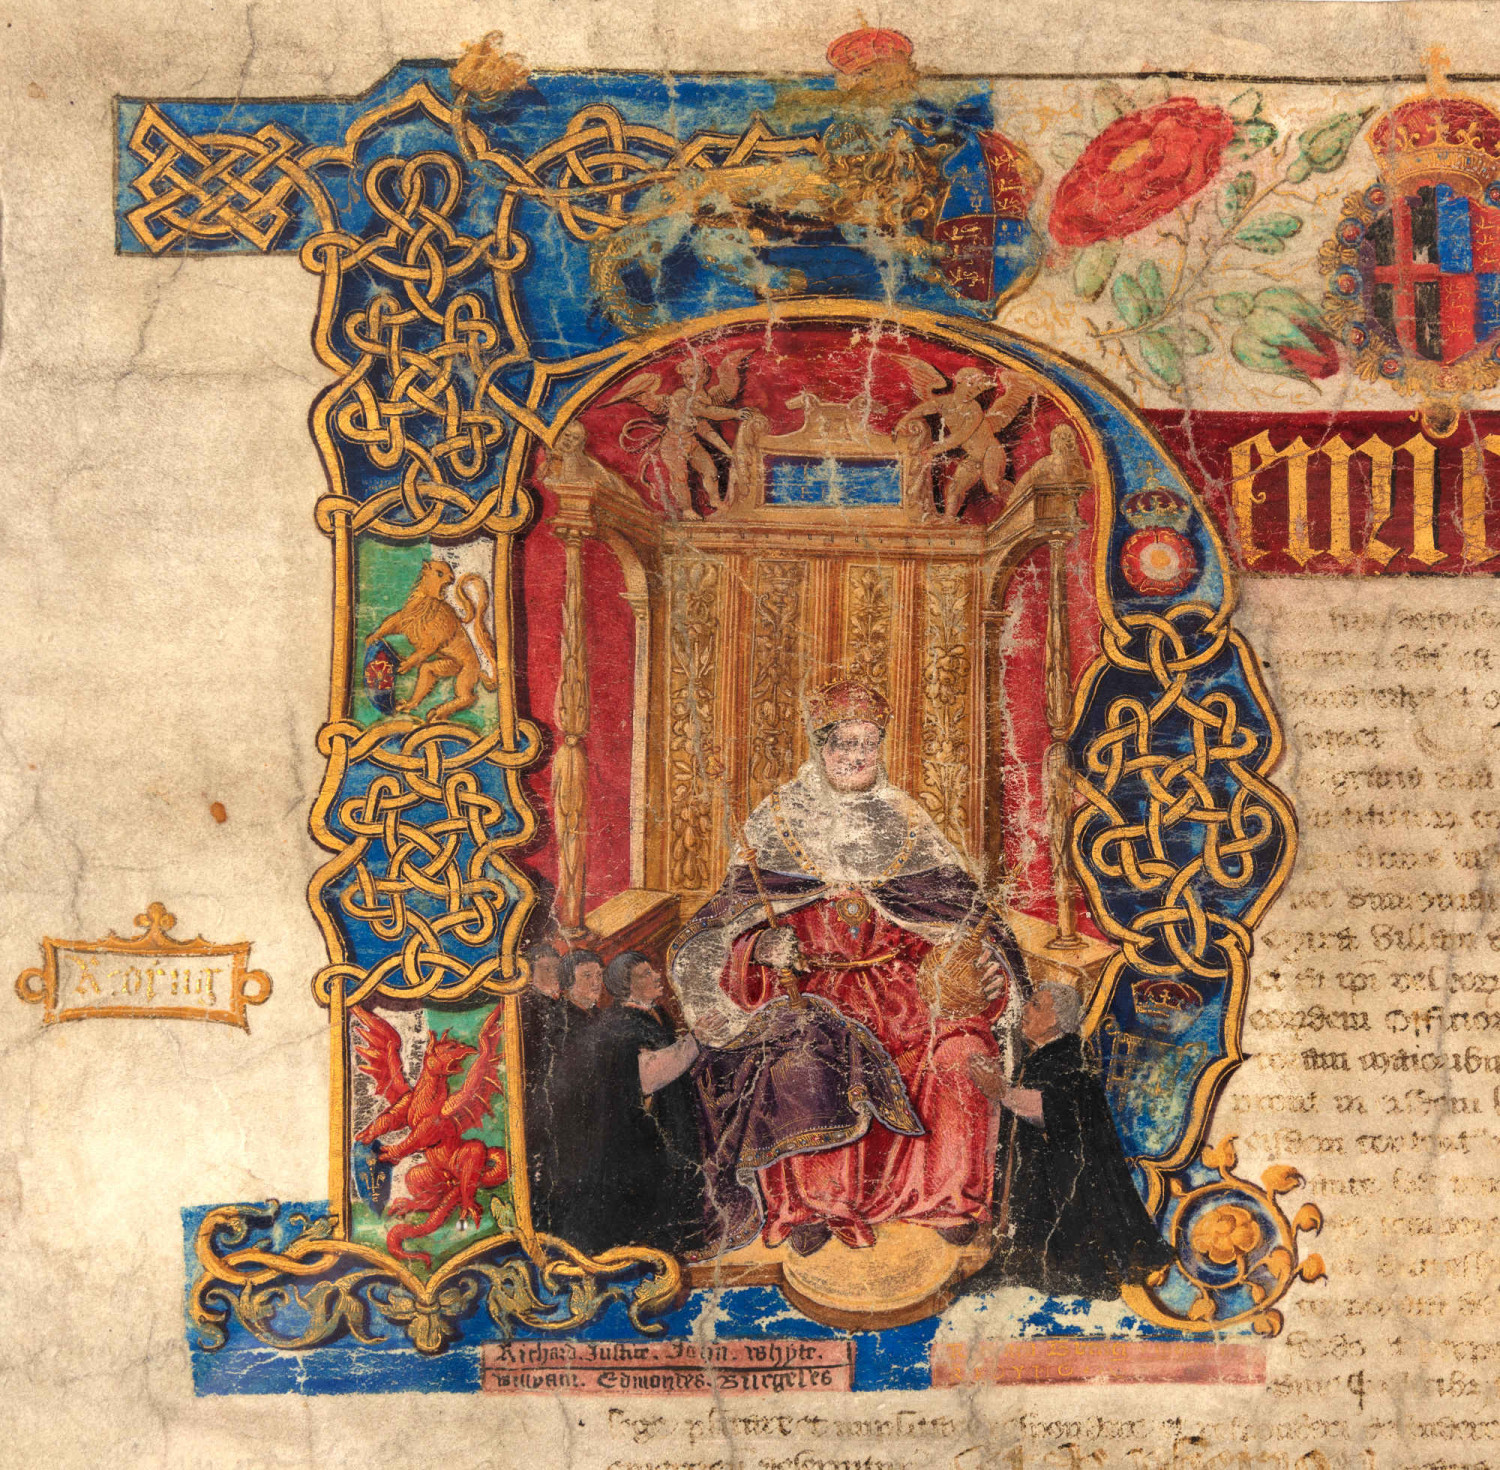 Colourful hand drawn letter H with image of Henry VIII within it from 1542.